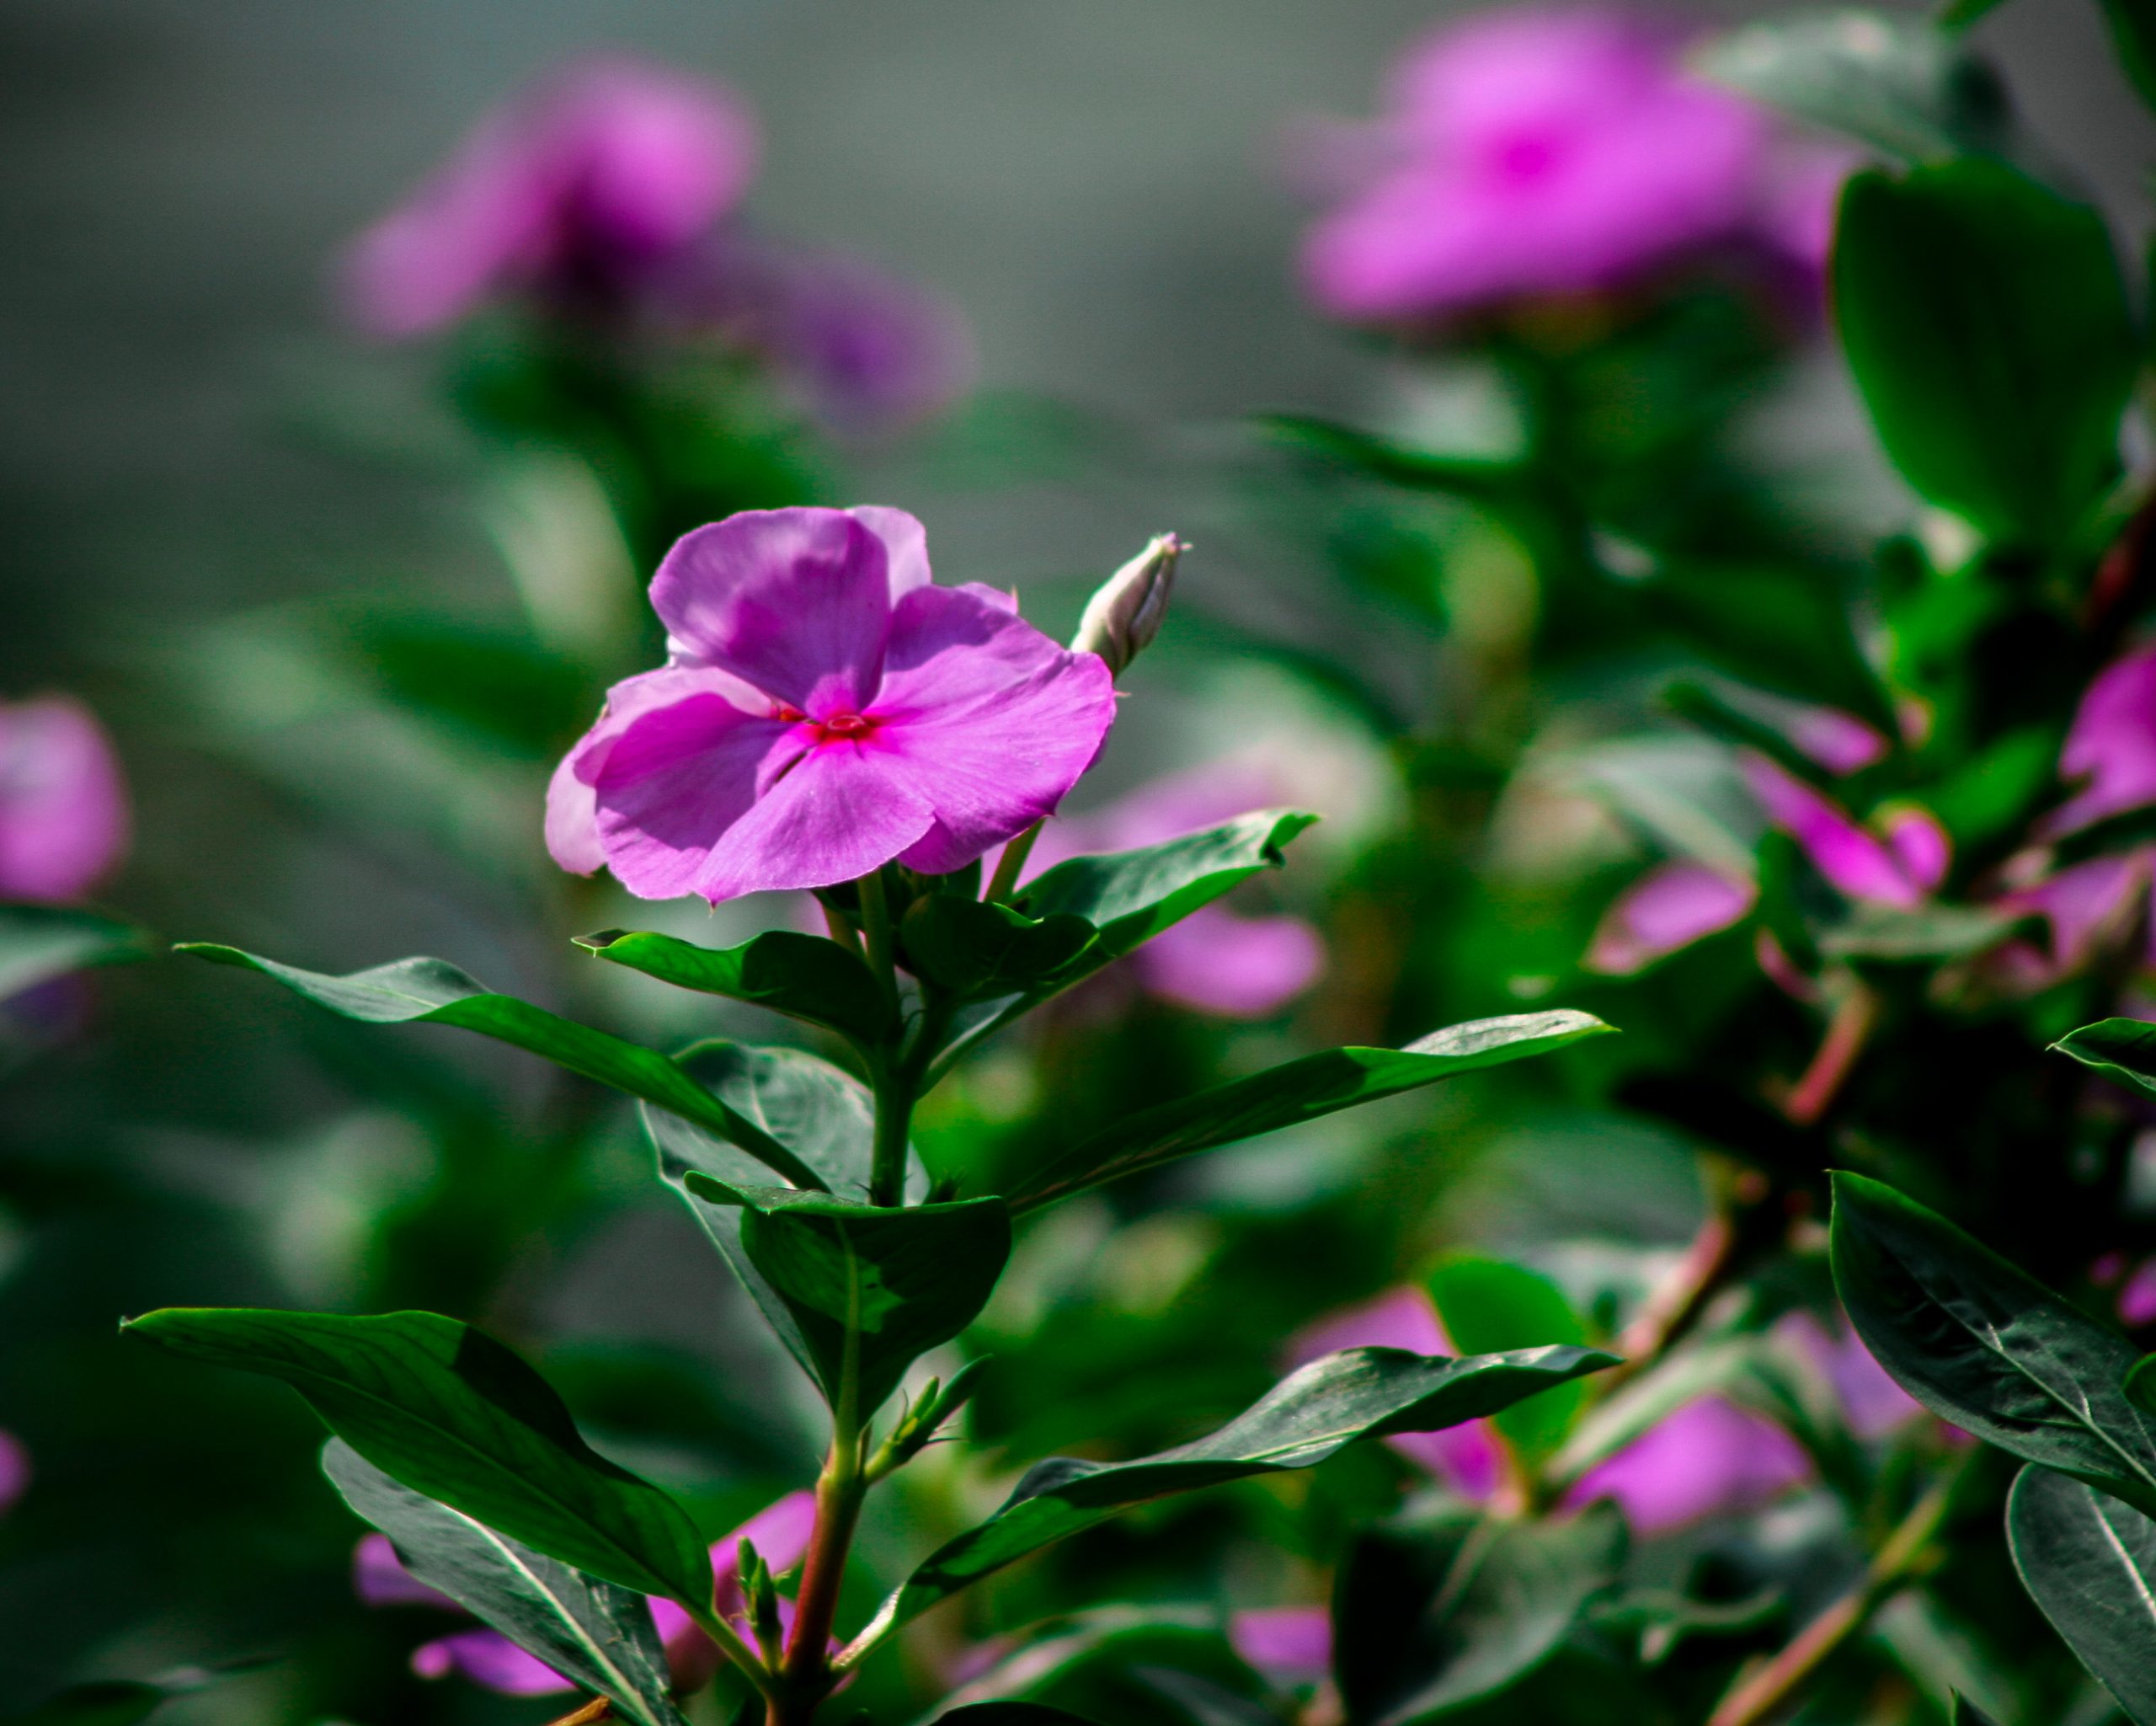 A beautiful Catharanthus flower image